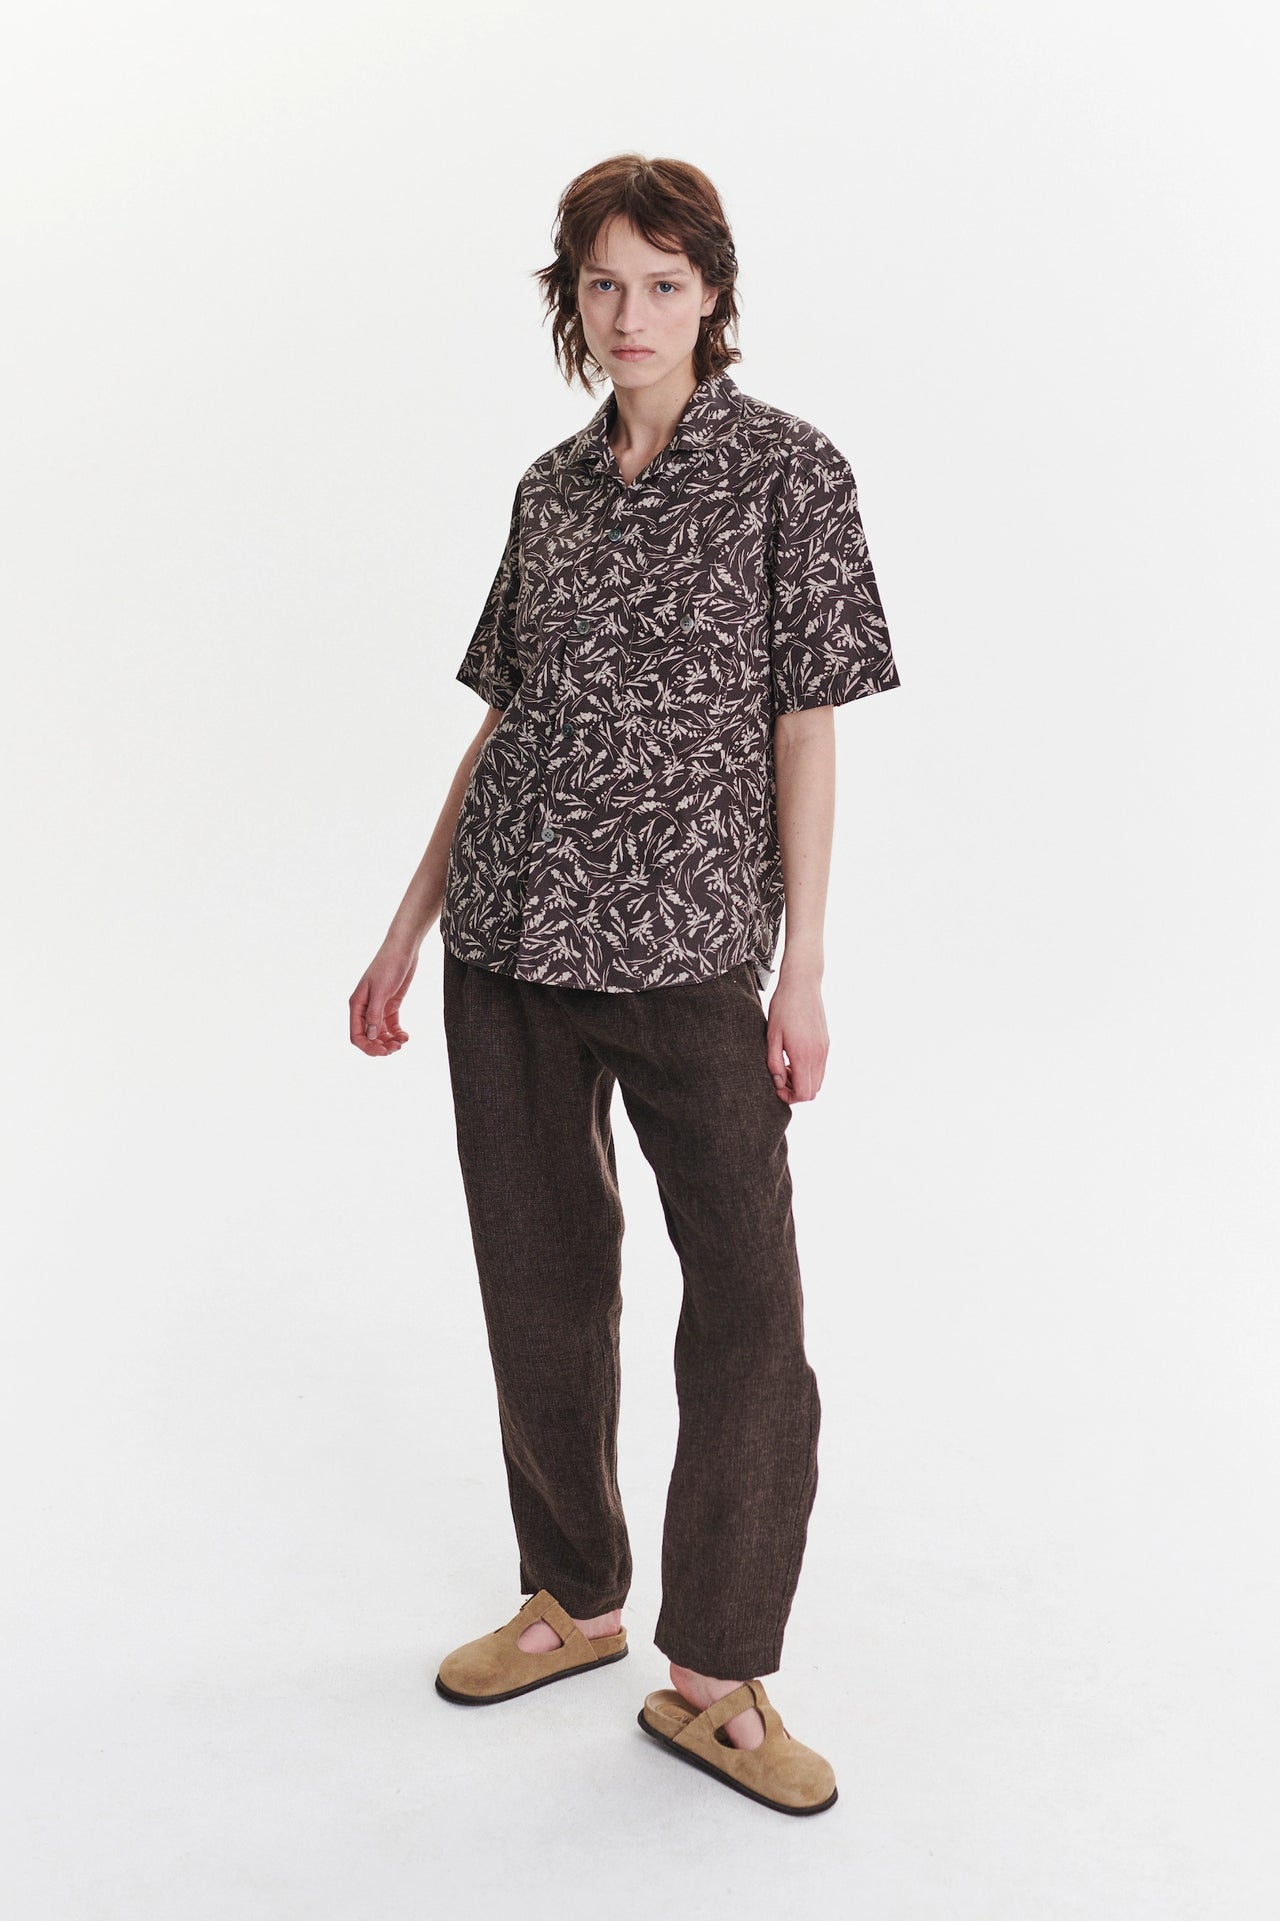 Unisex Short Sleeve Camp Collar Shirt in a Subtle Brown and Off White Floral Printed Italian Cotton